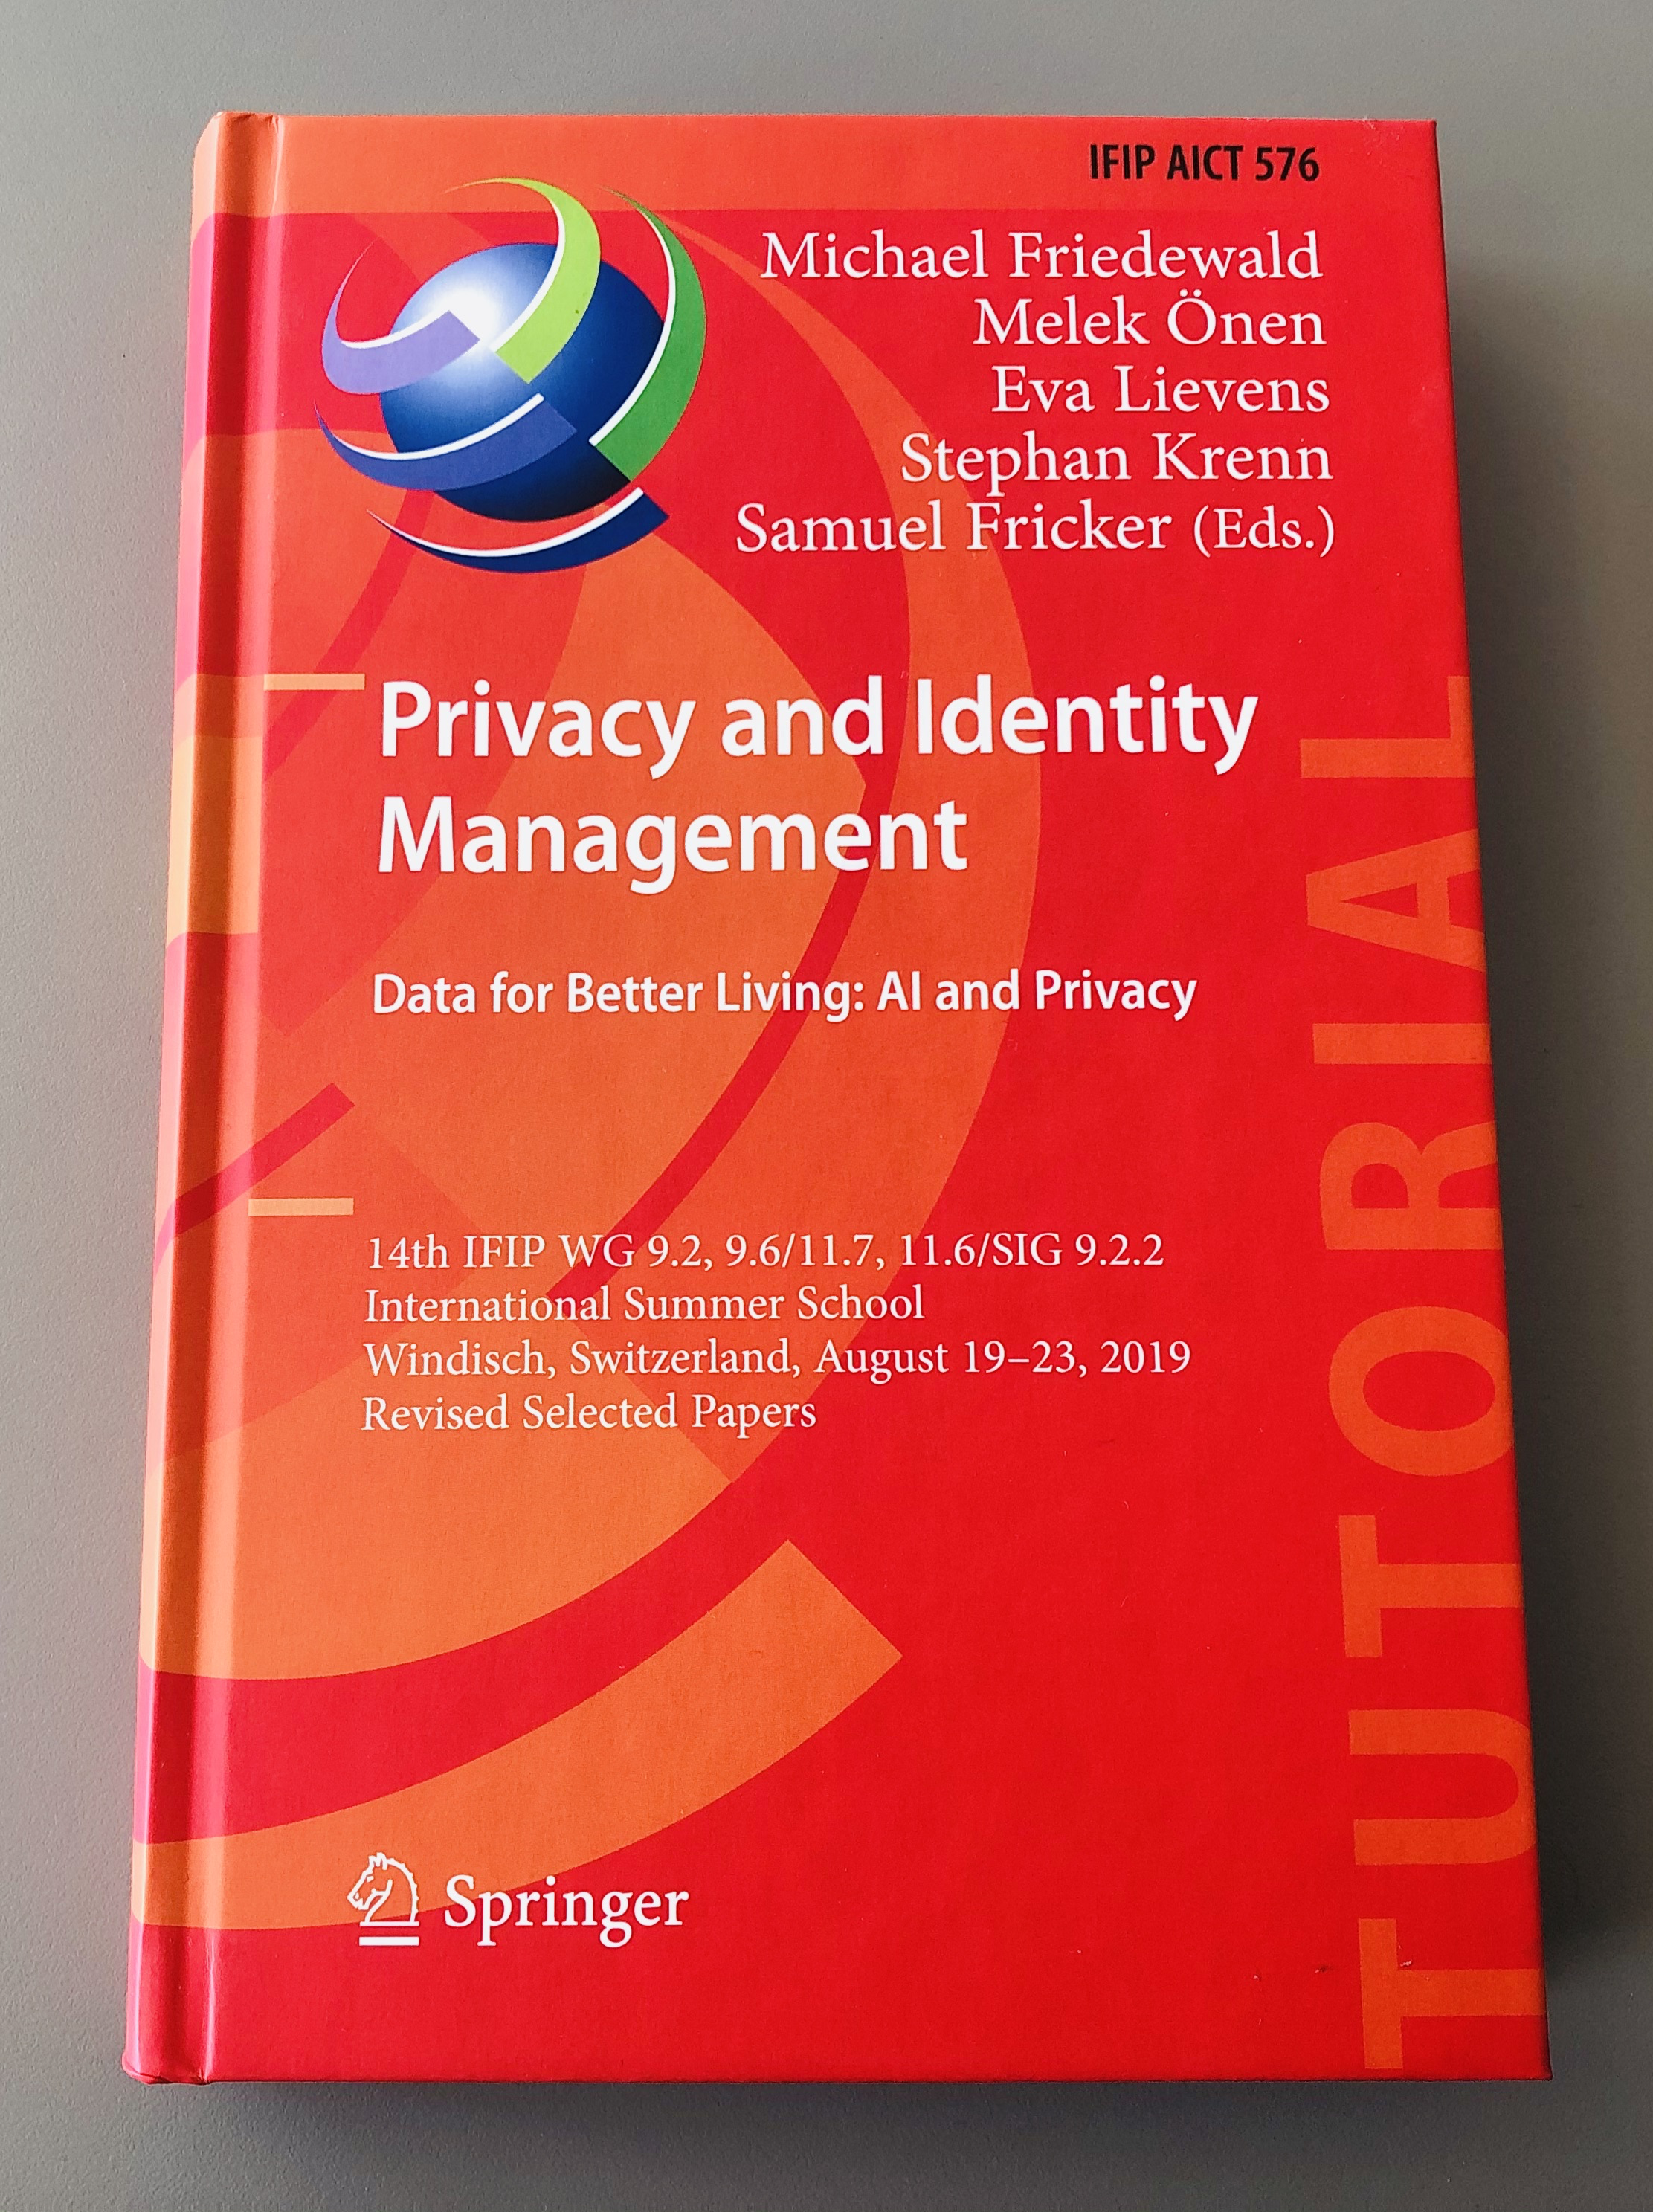 Privacy and Identity Management